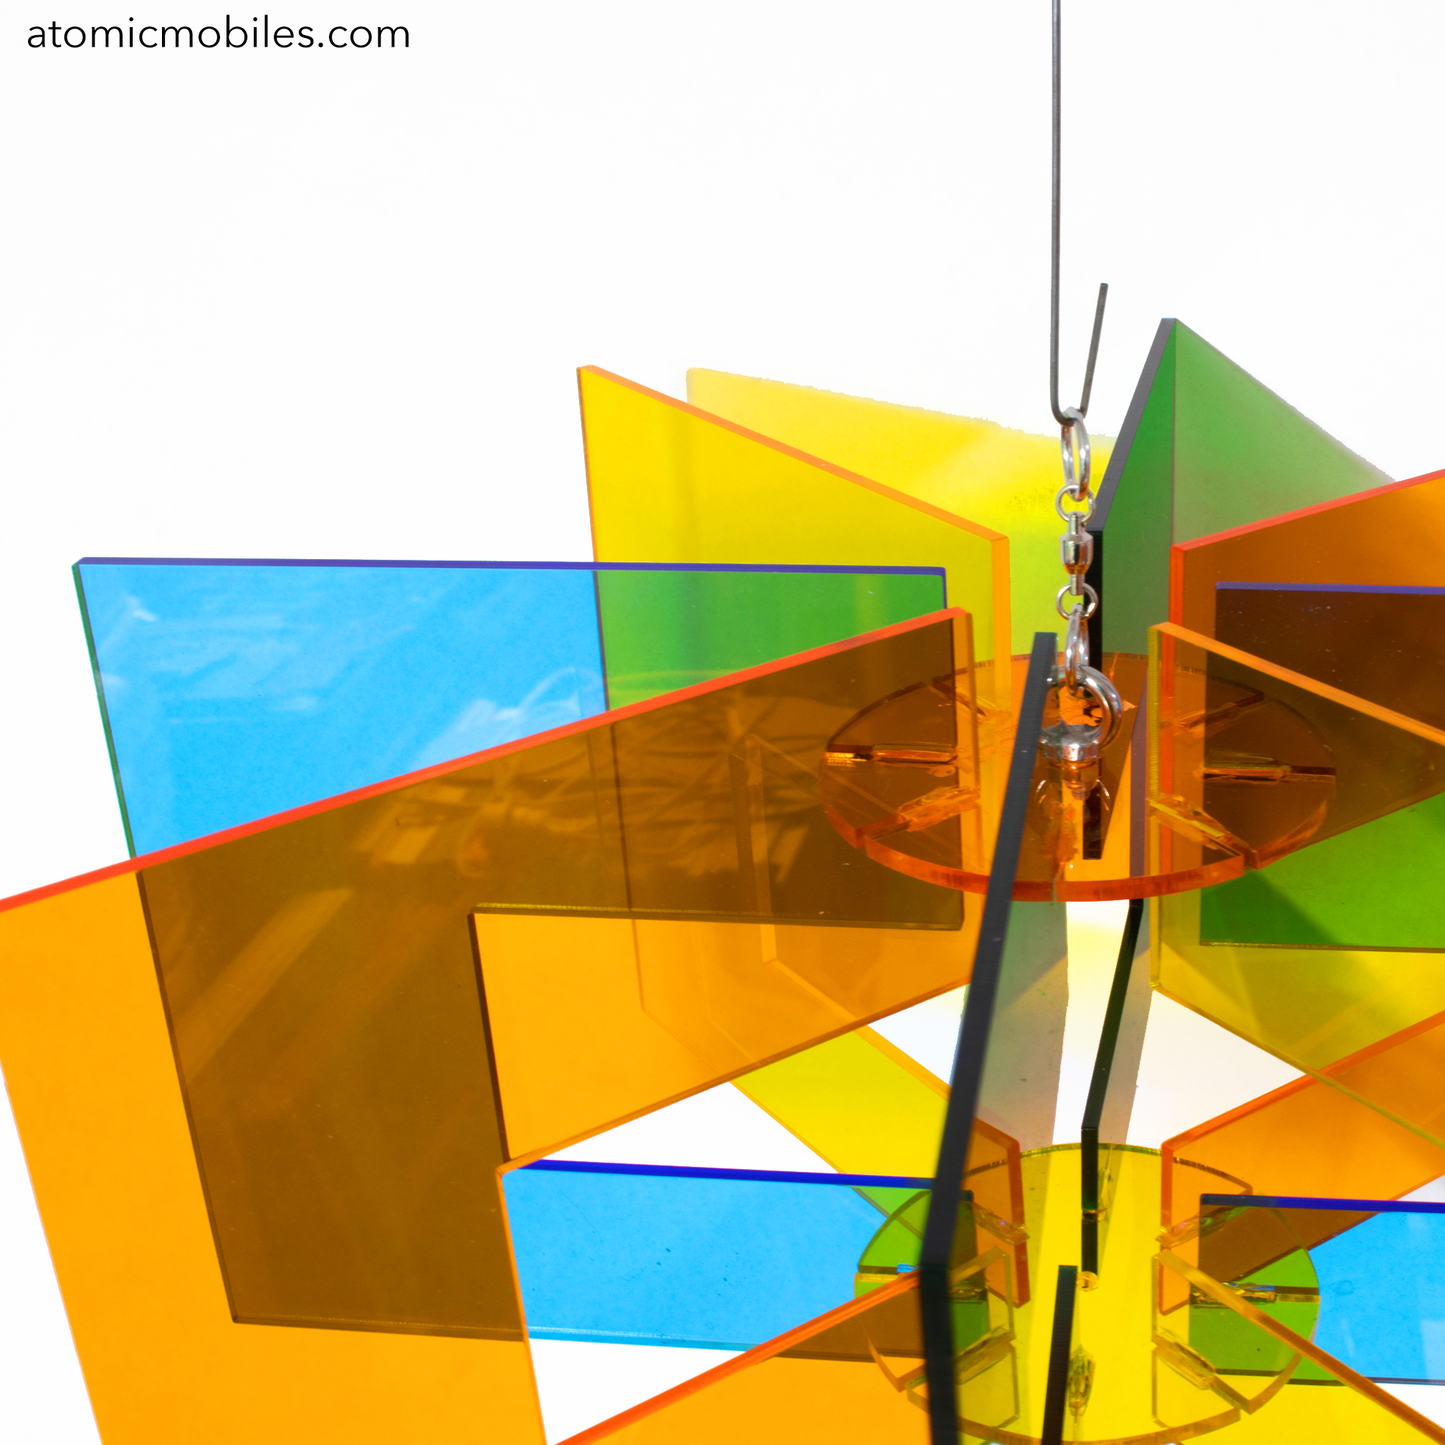 Space Age RotaMobile - beautiful rotating kinetic hanging art mobile in clear acrylic colors of Orange, Yellow, Blue and Green by AtomicMobiles.com